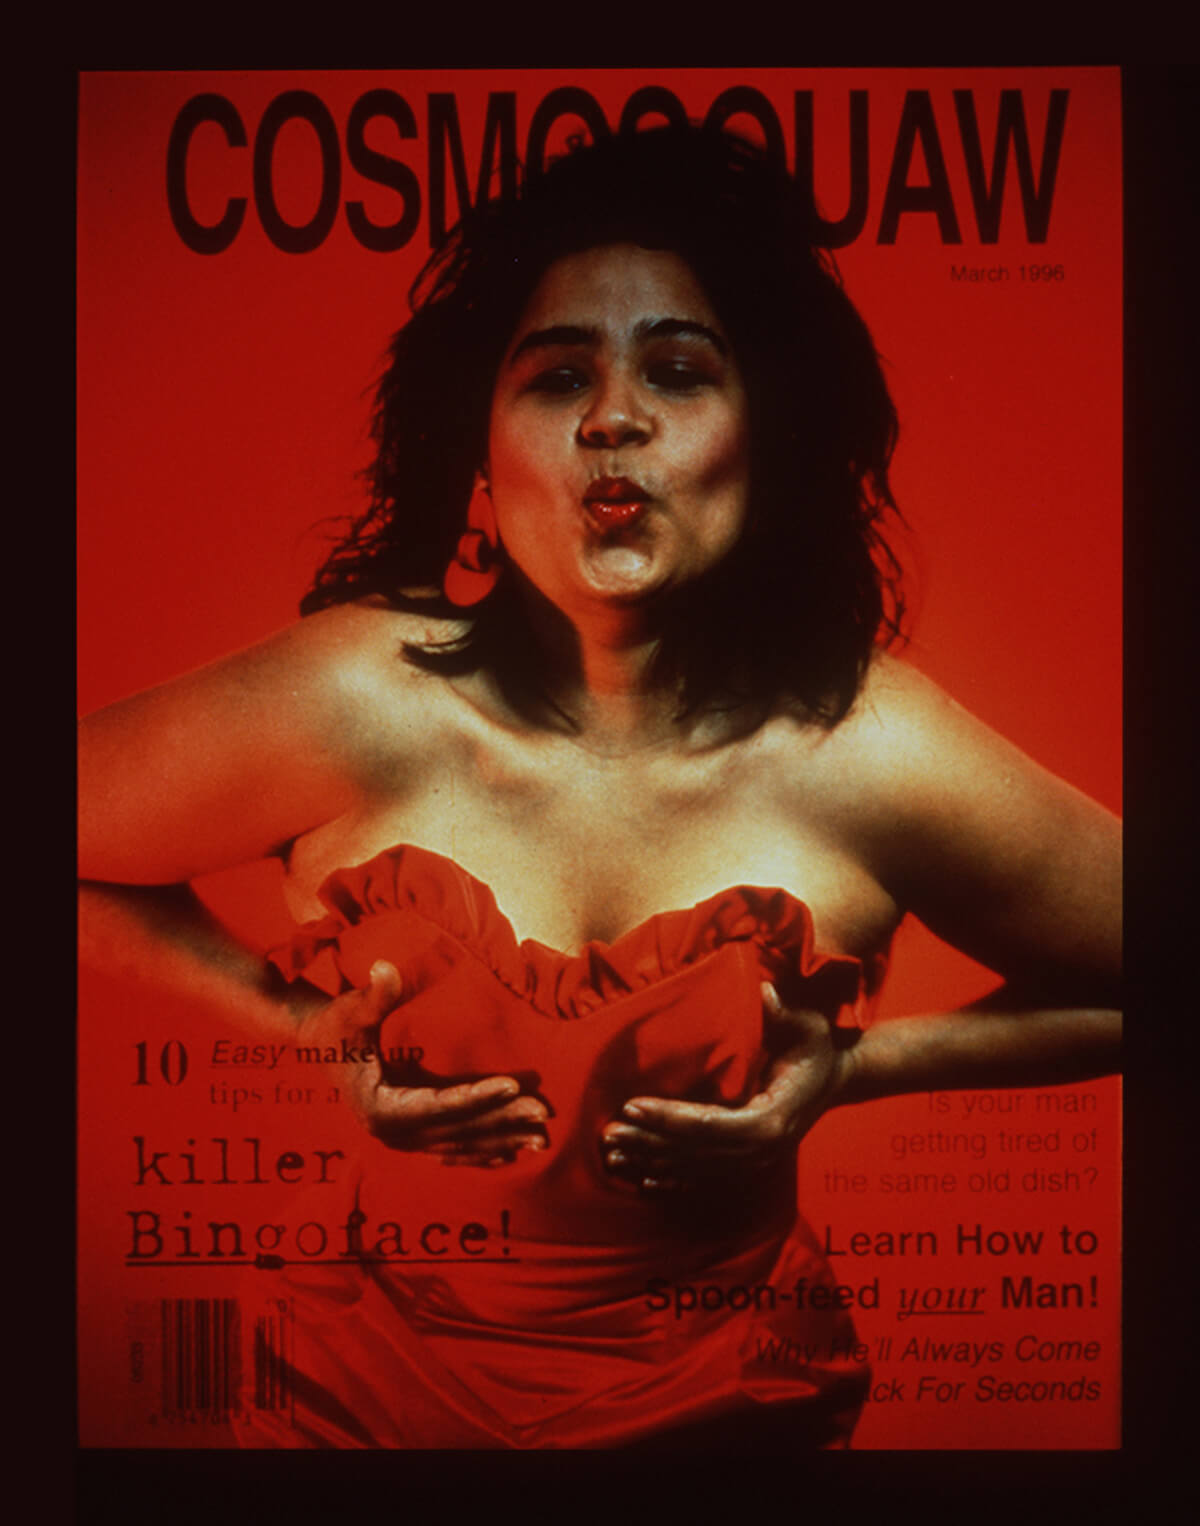 The artist poses on a parody cover of Cosmo magazine.